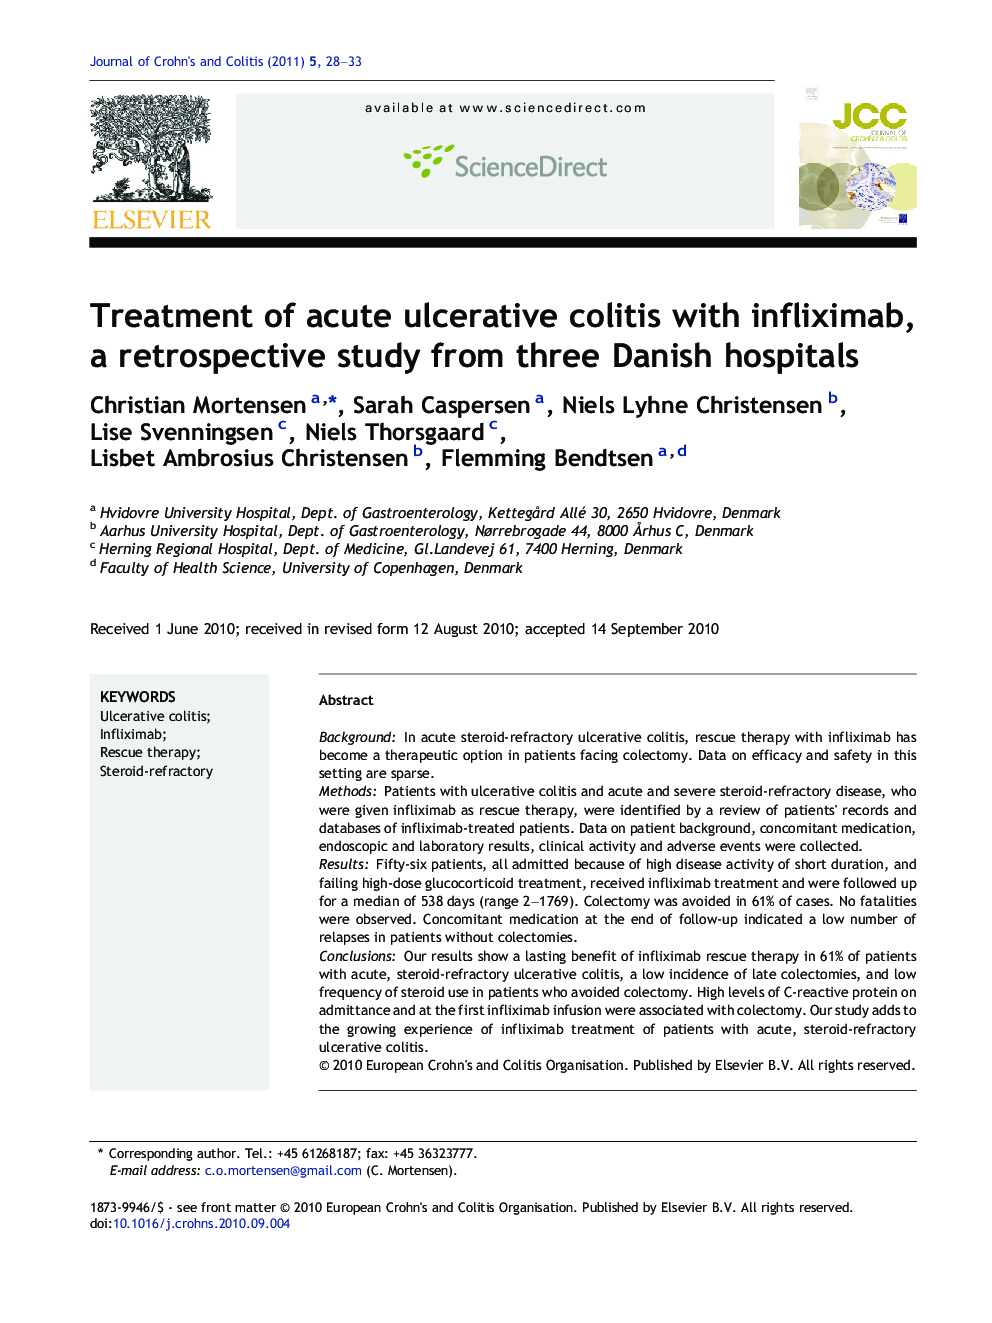 Treatment of acute ulcerative colitis with infliximab, a retrospective study from three Danish hospitals